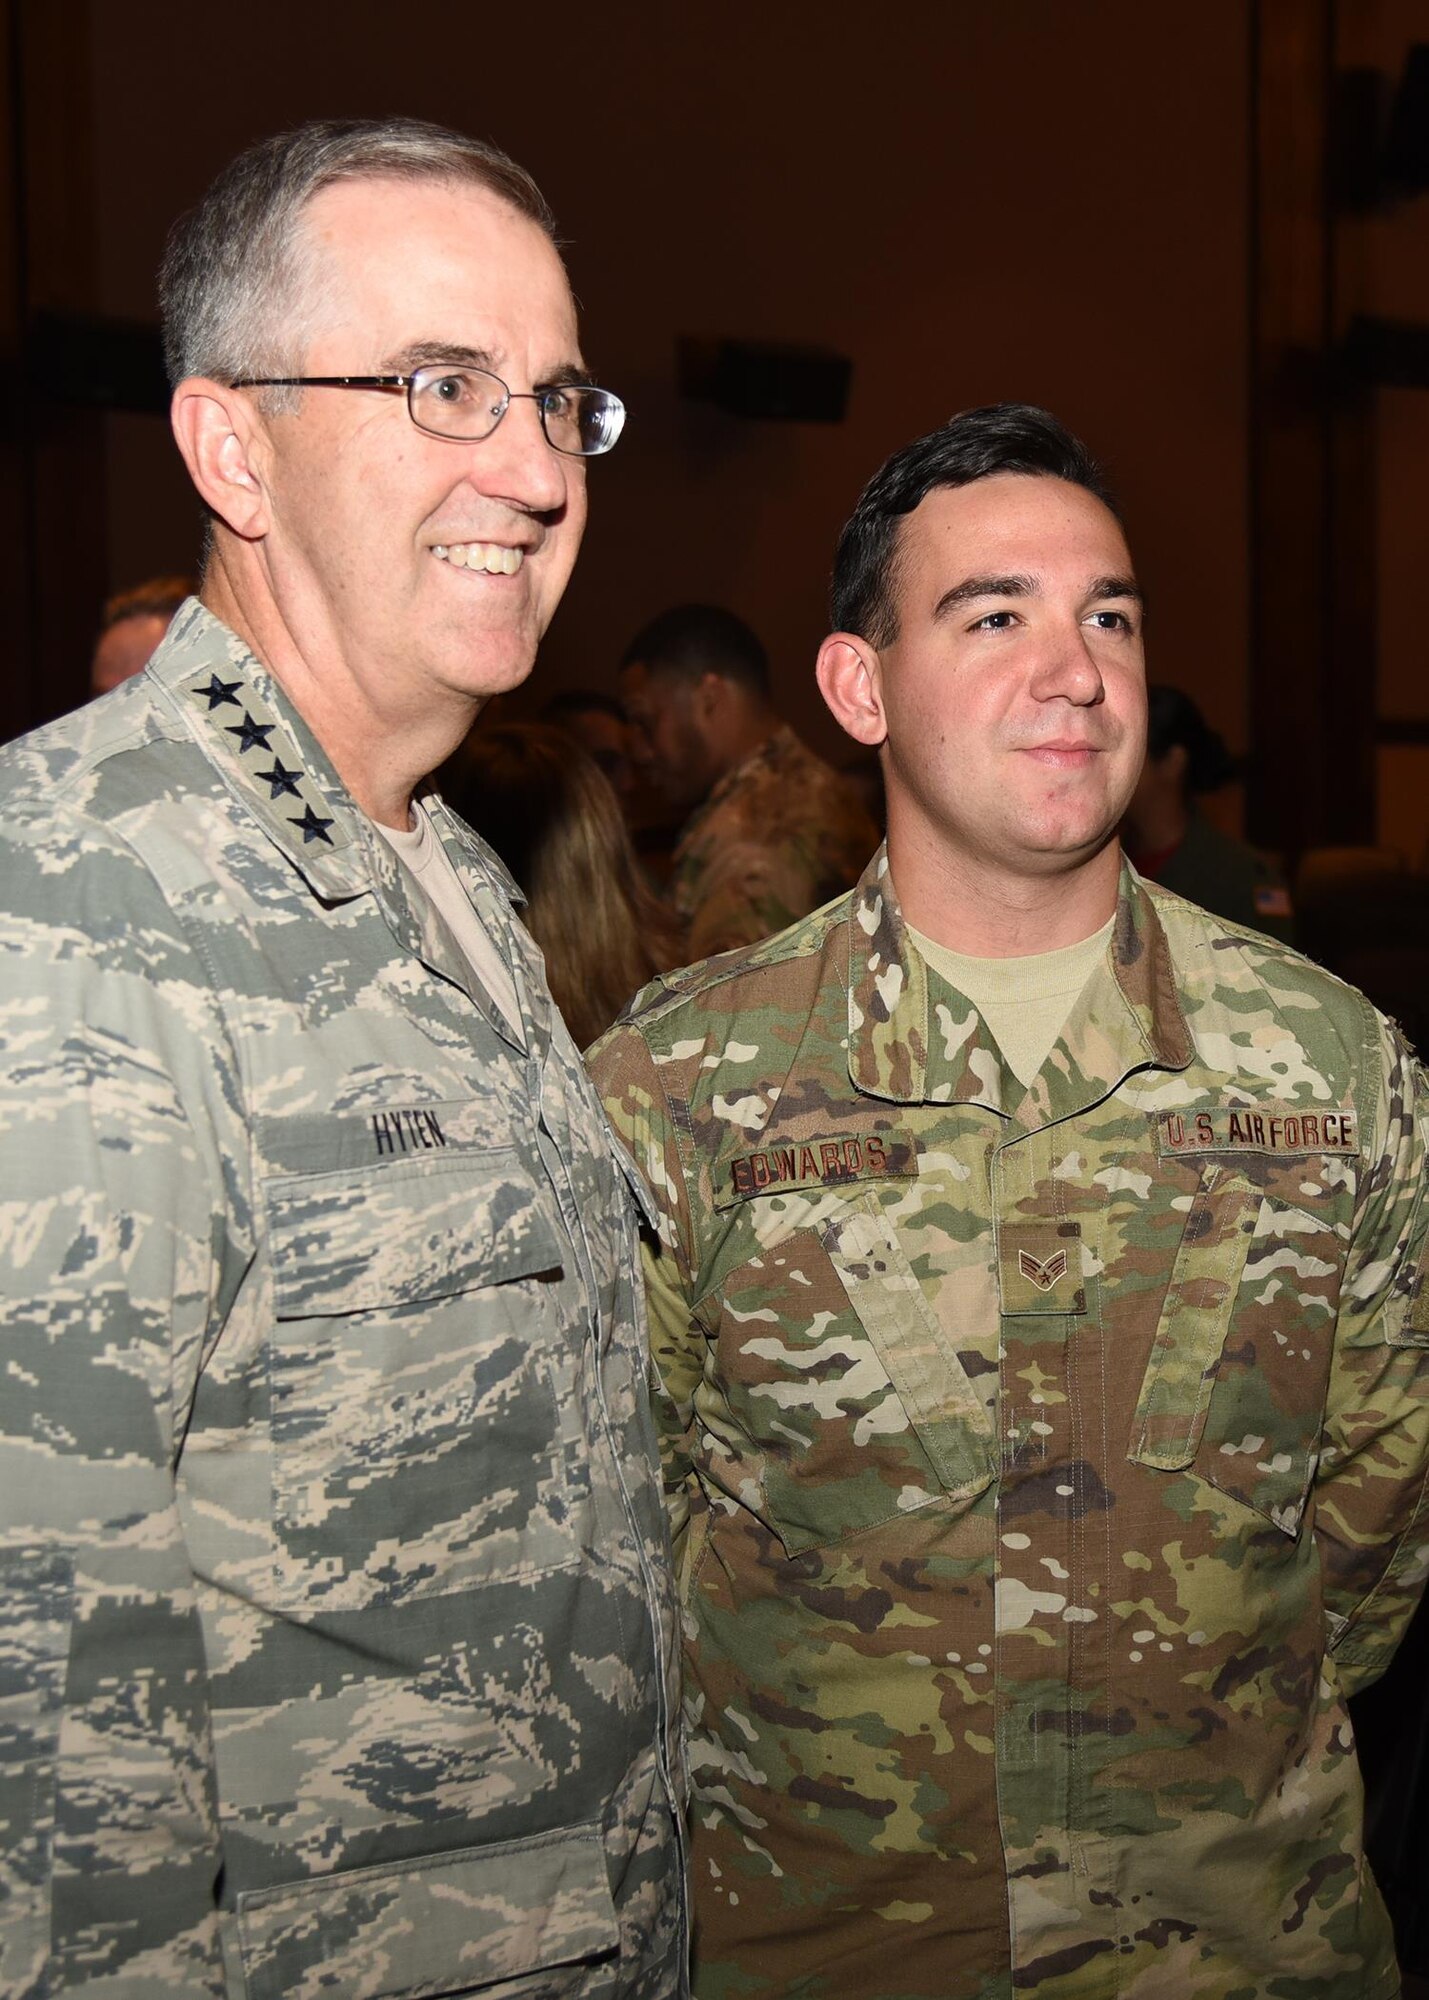 General John Hyten, commander of U.S. Strategic Command, poses for a photo with Senior Airman Ethan Edwards, member of the 90th Security Forces group, after an all-call at the F. E. Warren Air Force Base, Wyo., theater July 21, 2017. The Omaha Trophy is awarded to the best missile wing in USSTRATCOM. (U.S. Air Force photo by Glenn S. Robertson)